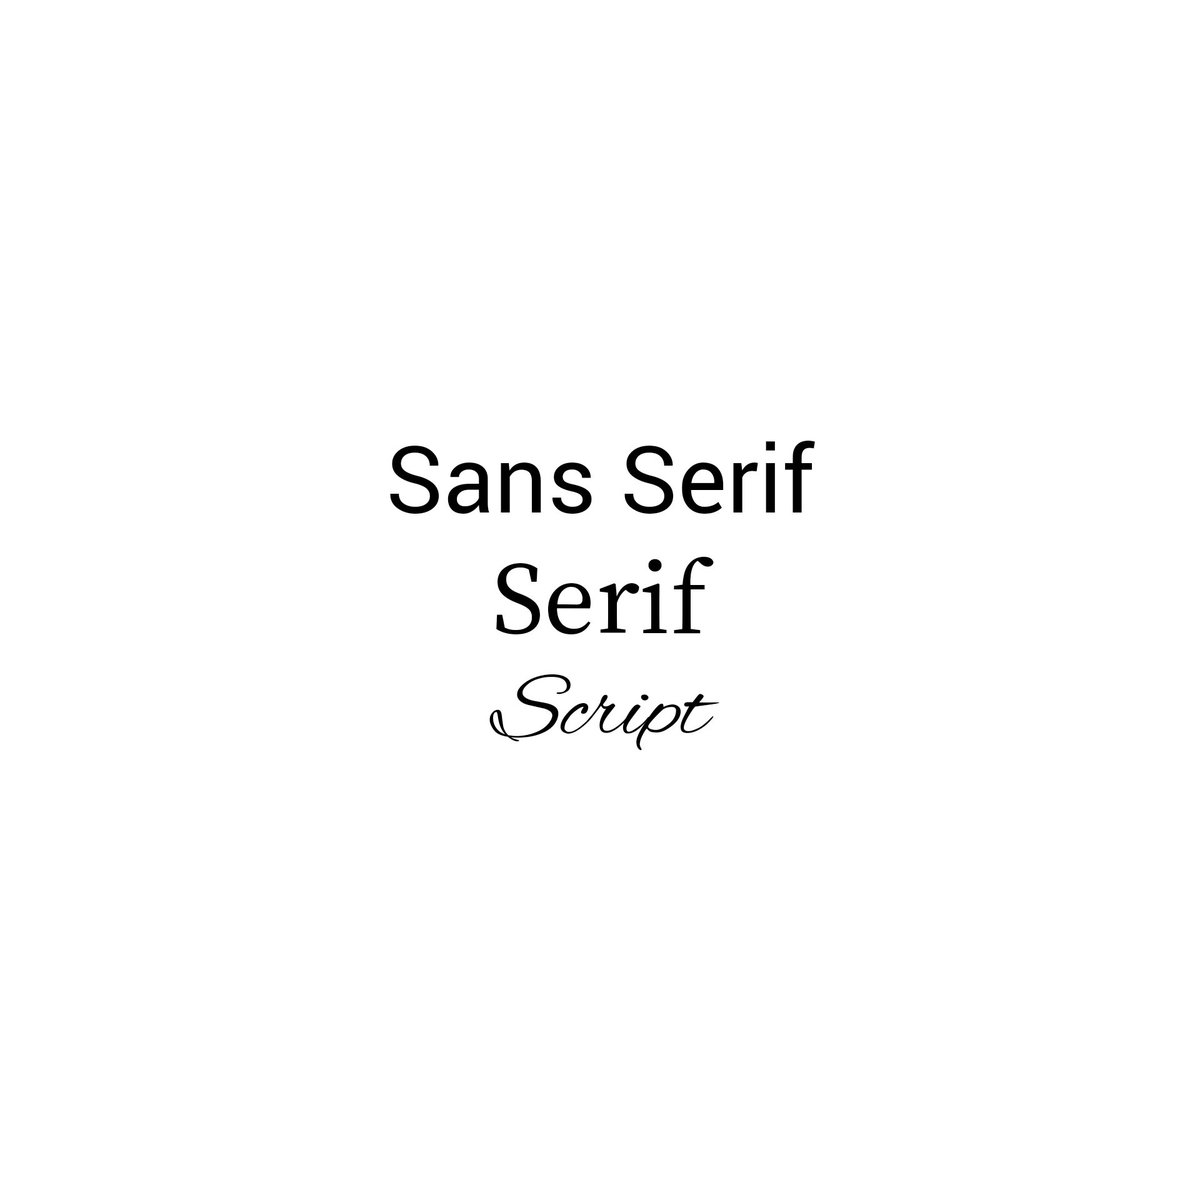 TYPEFACES:There are different types of typefaces but I only listed the most used typefaces in editing, writing and lettering.1. San Serif - bold face, straight lines2. Serif - tails, different thin and thickness3. Script - cursive, flowing